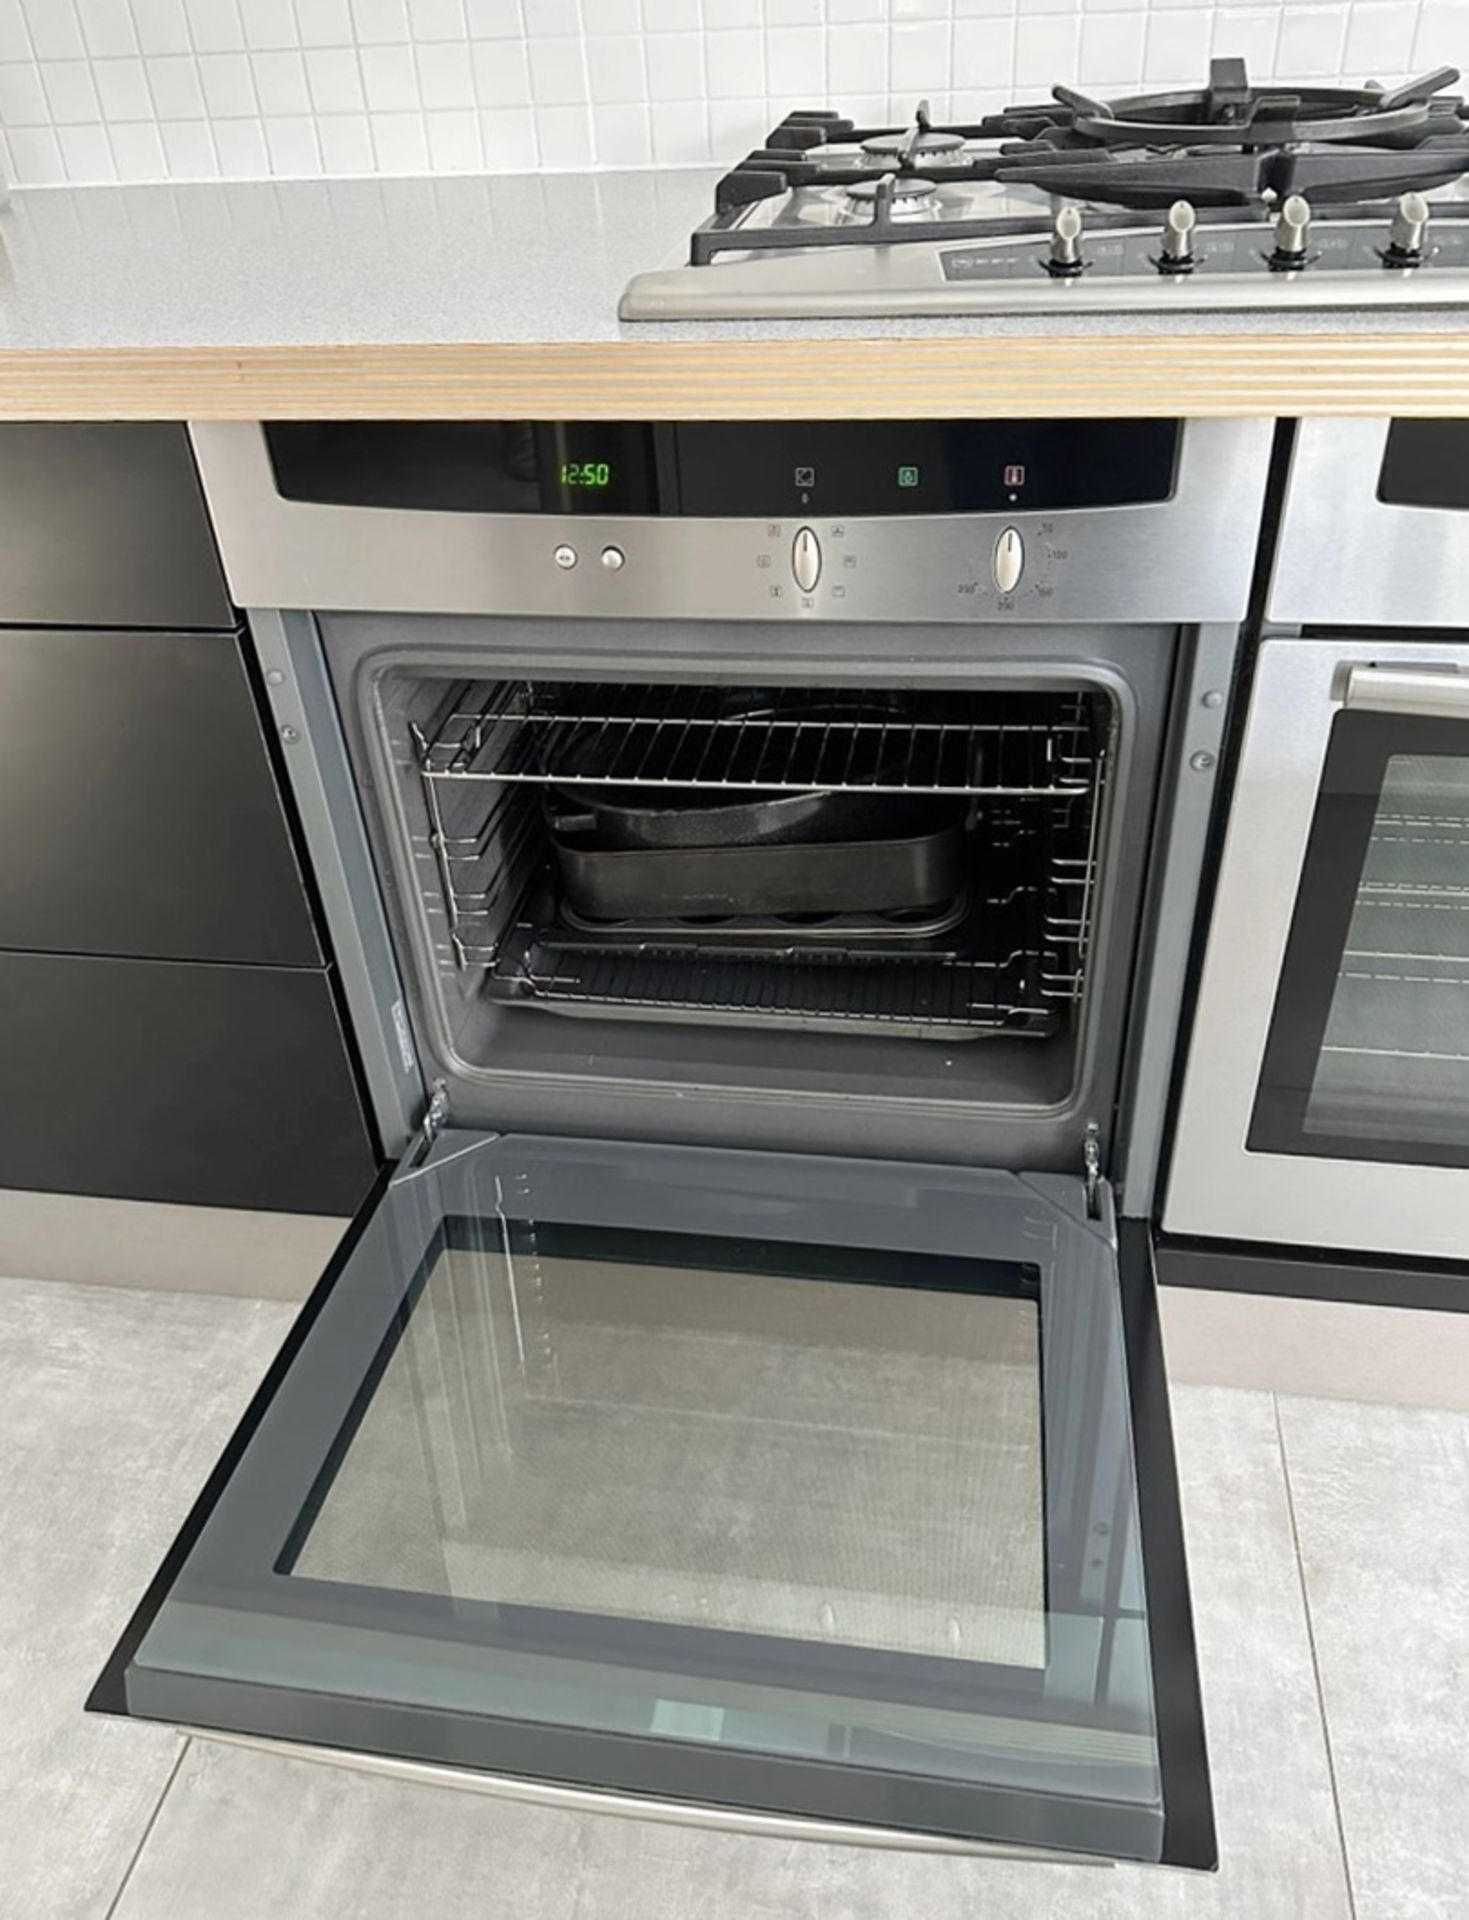 1 x Stunning SYSTEMAT Premium German Fitted Kitchen With NEFF Appliances, and Central Island - Image 16 of 41